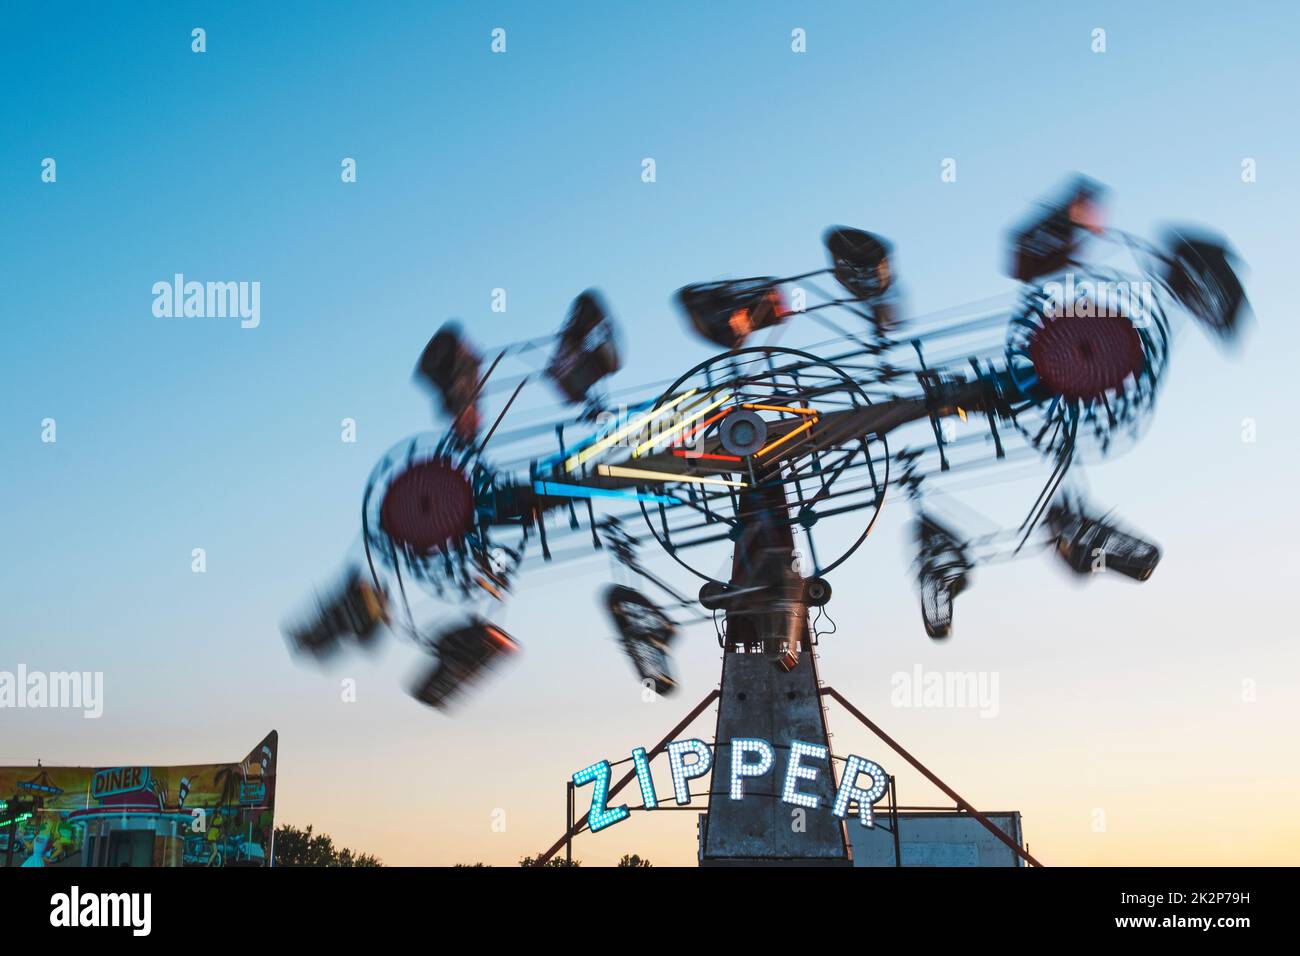 A zipper ride in background of blue sky in Decatur during sunset Stock Photo